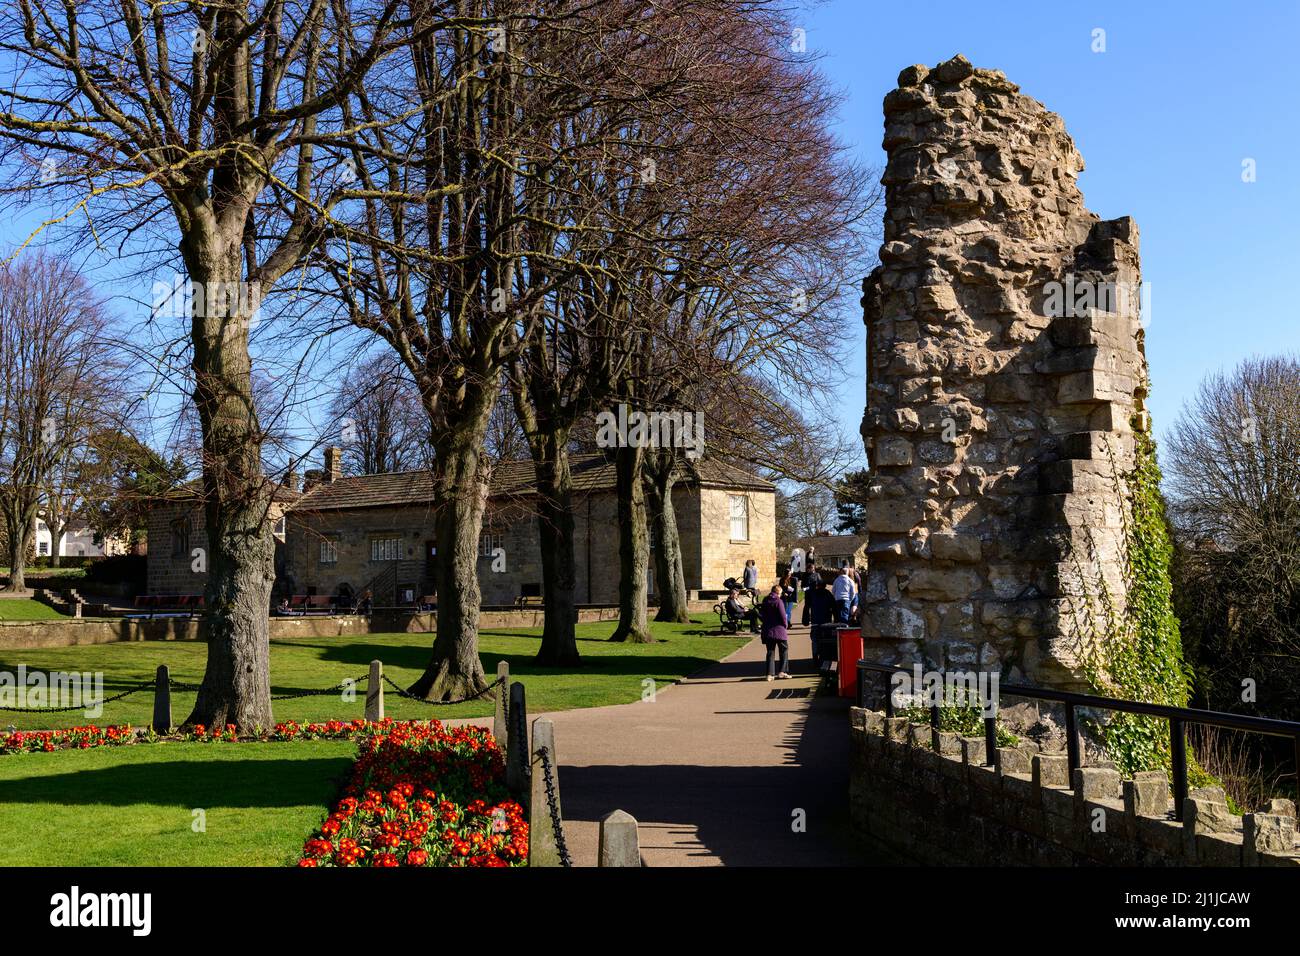 People relaxing, walking on paths in sunny park (bright border flowers, ancient ruins, blue sky) - Knaresborough Castle, North Yorkshire, England, UK. Stock Photo